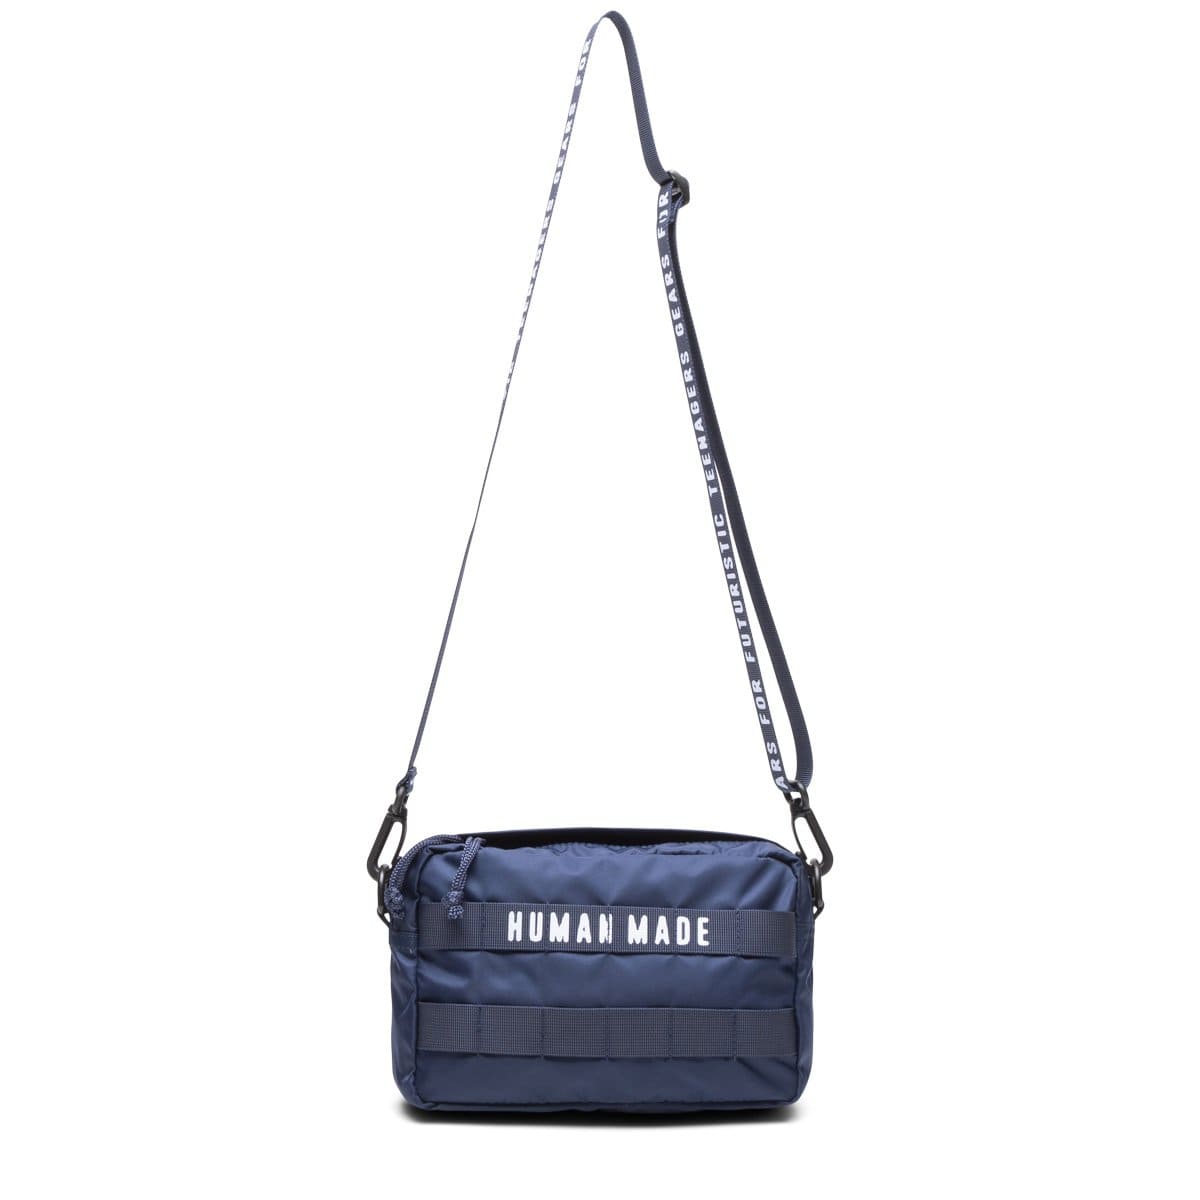 HUMAN MADE] MILITARY POUCH #1 NAVY-